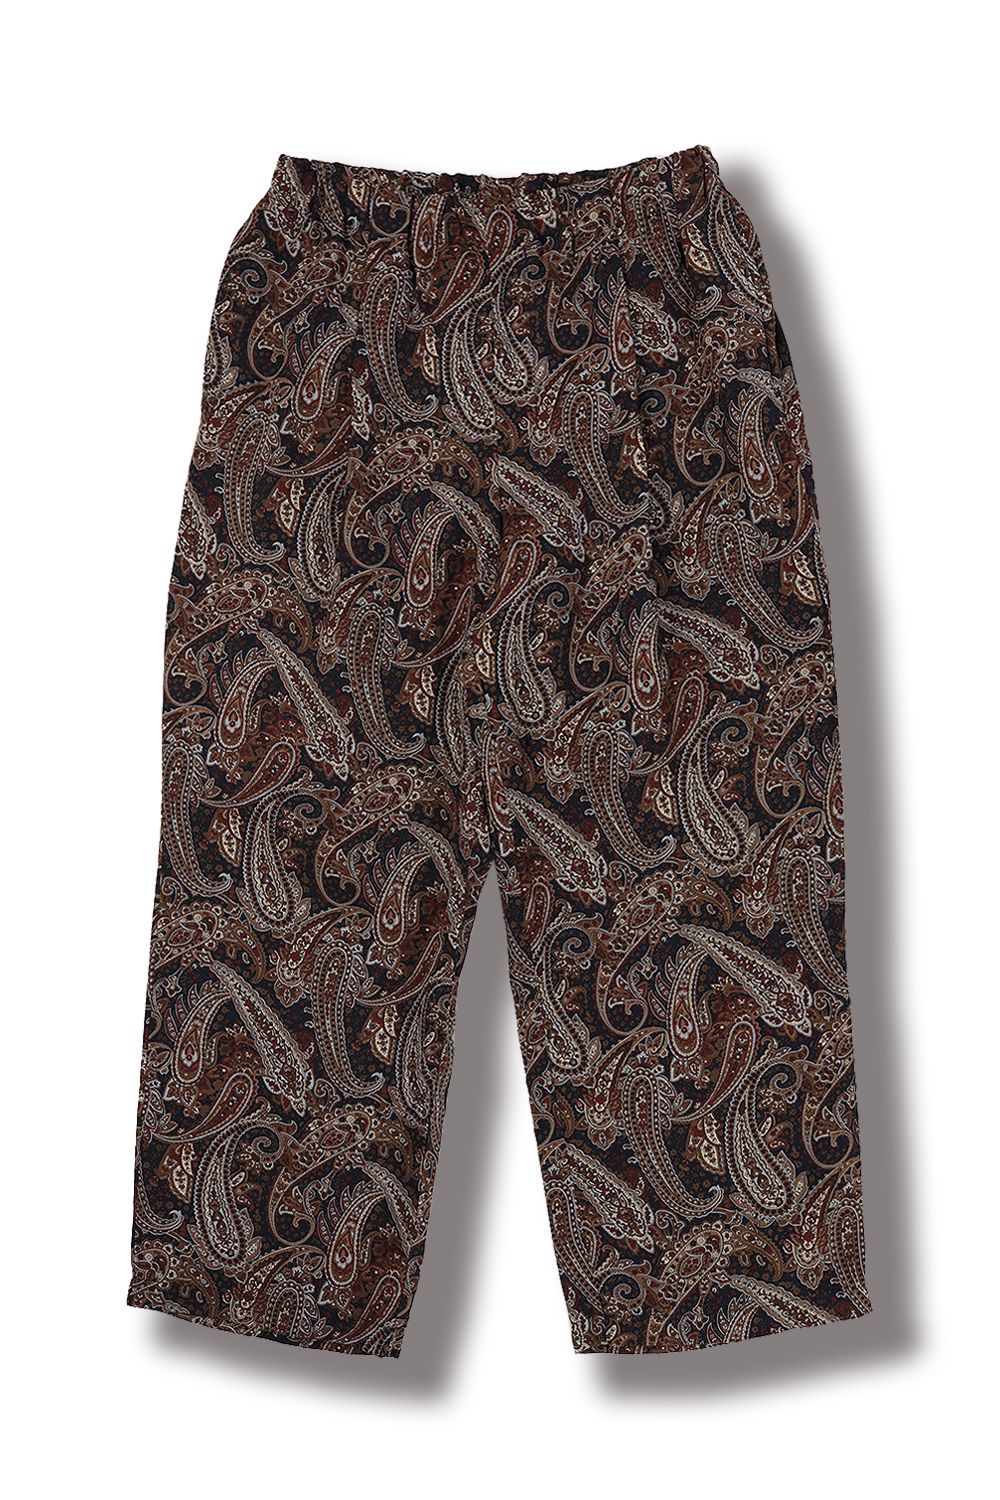 WEWILL PAISLEY PAJAMA TROUSERS 23ss | settannimacchineagricole.it